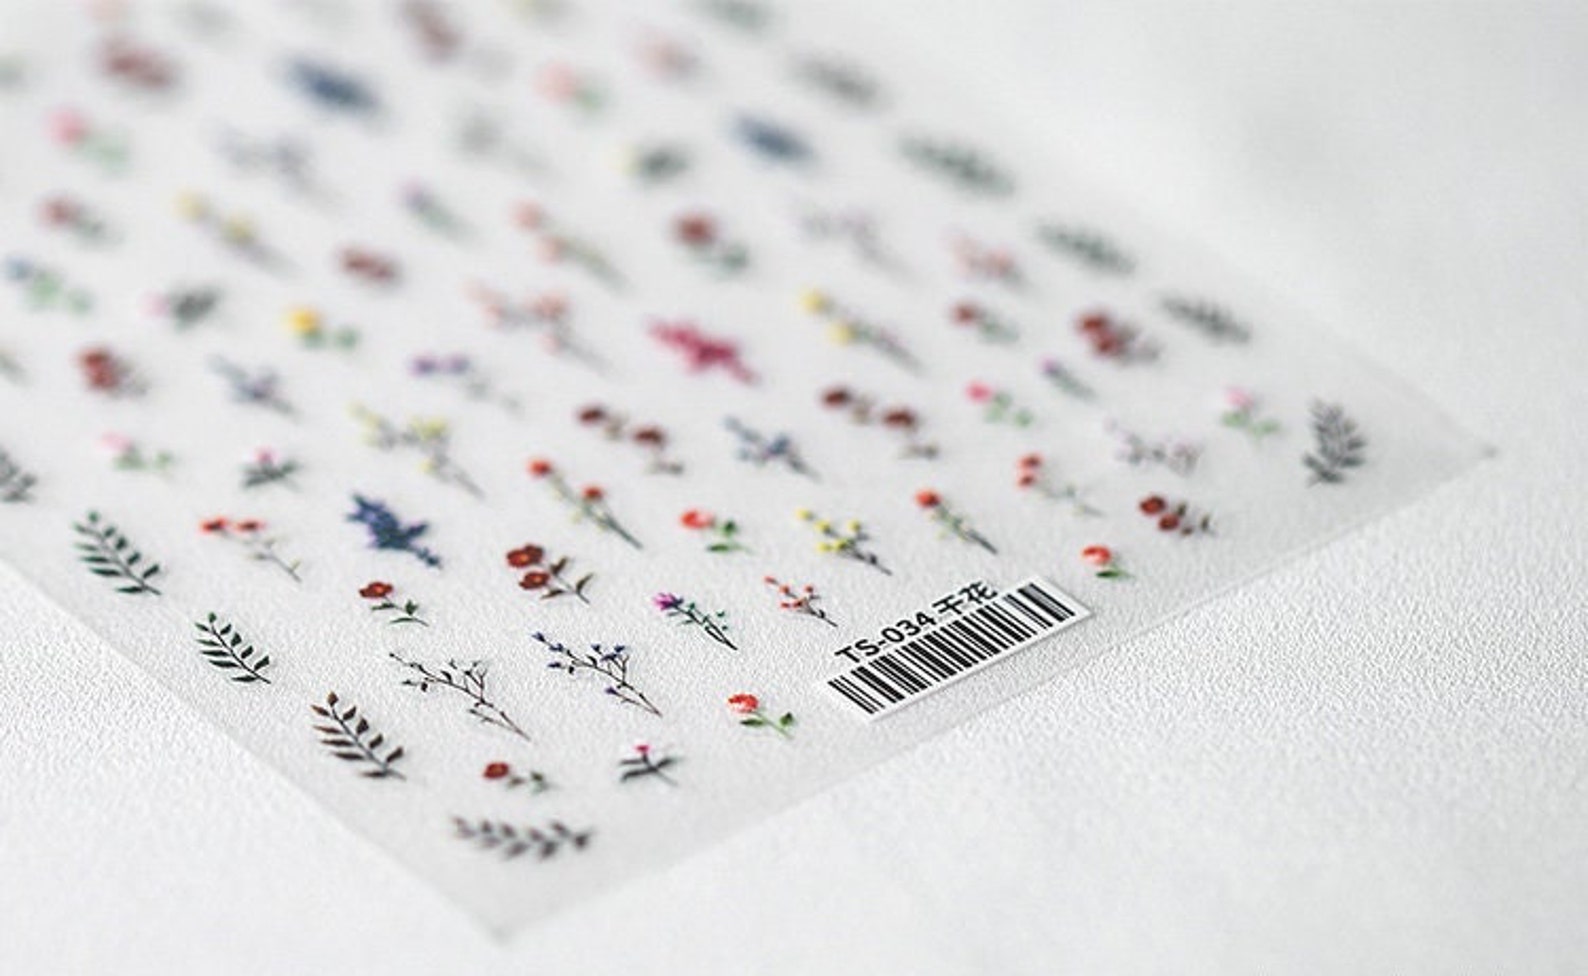 Little Flower Nail Decal Sticker/ Cute Floral Nail Art/ Wild - Etsy